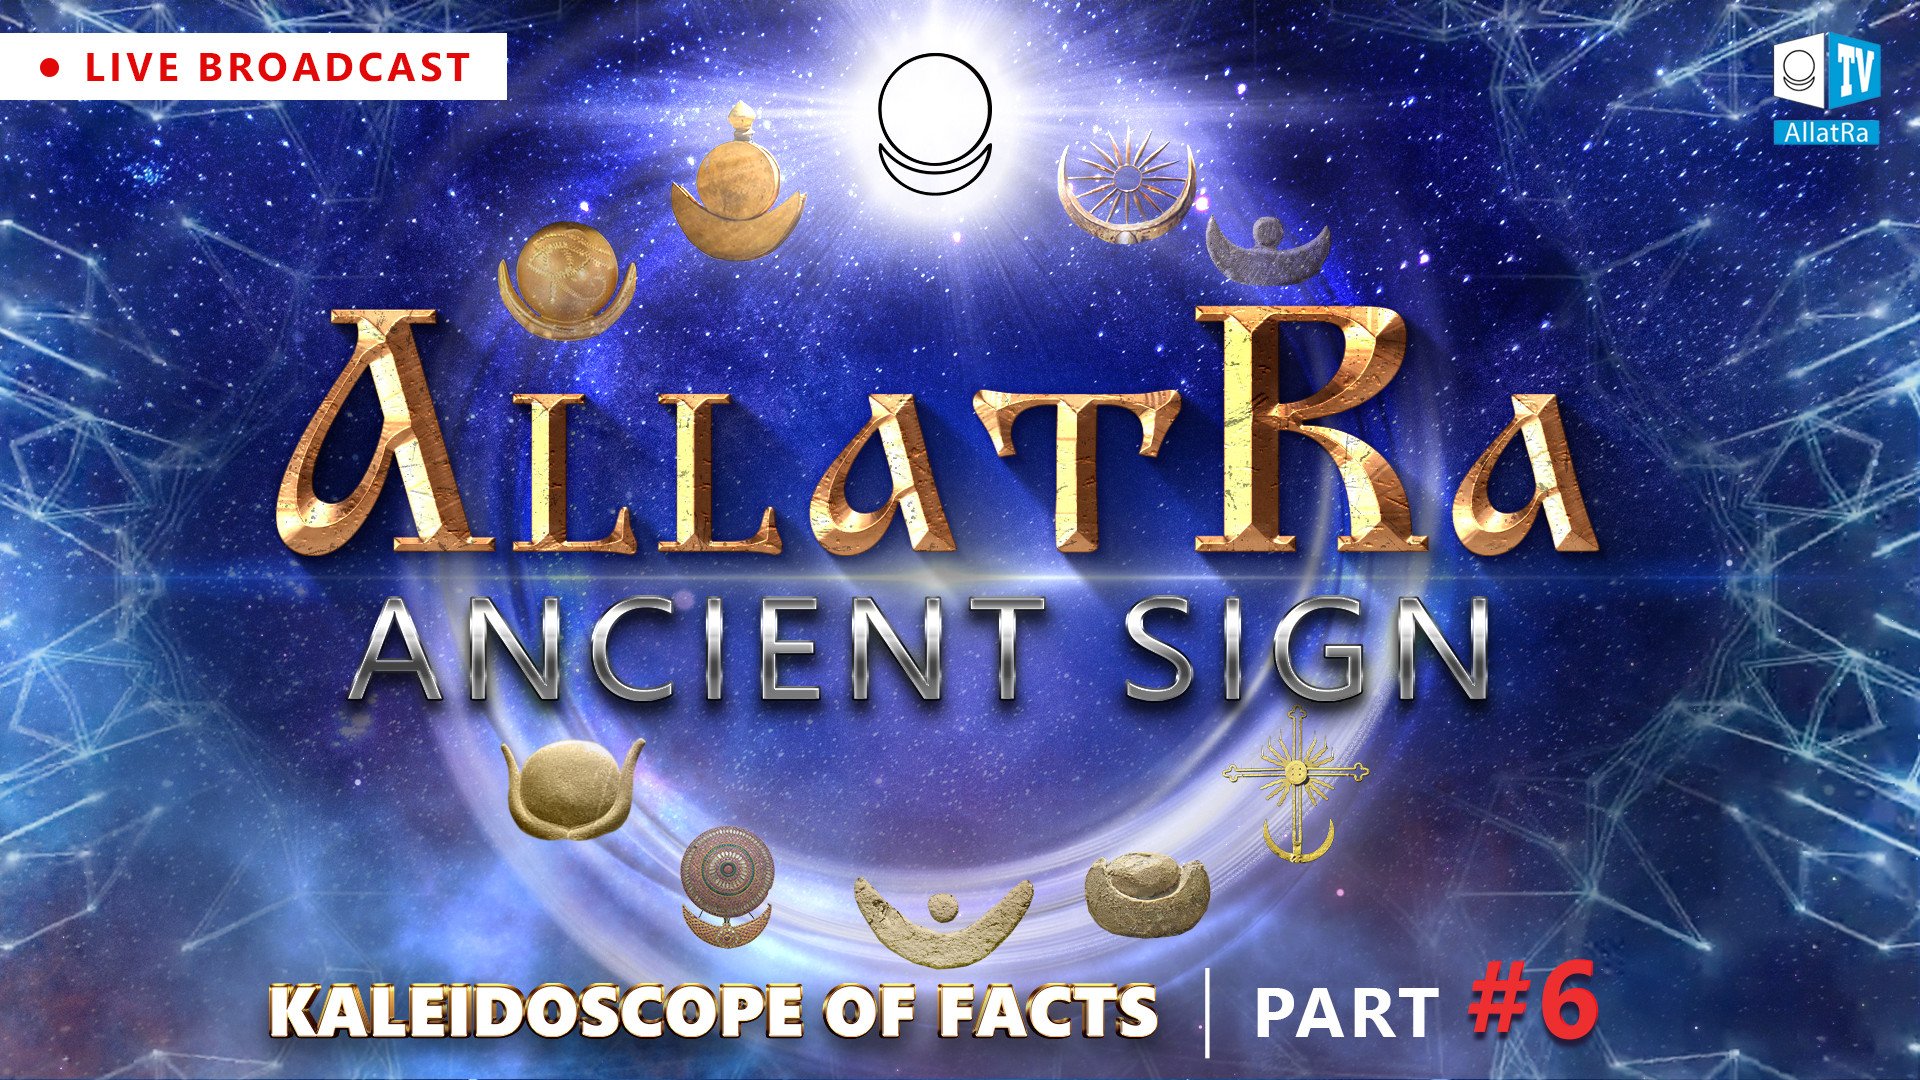 Ancient AllatRa sign: the sacred meaning and role in the life of humanity |  Kaleidoscope of Facts 6